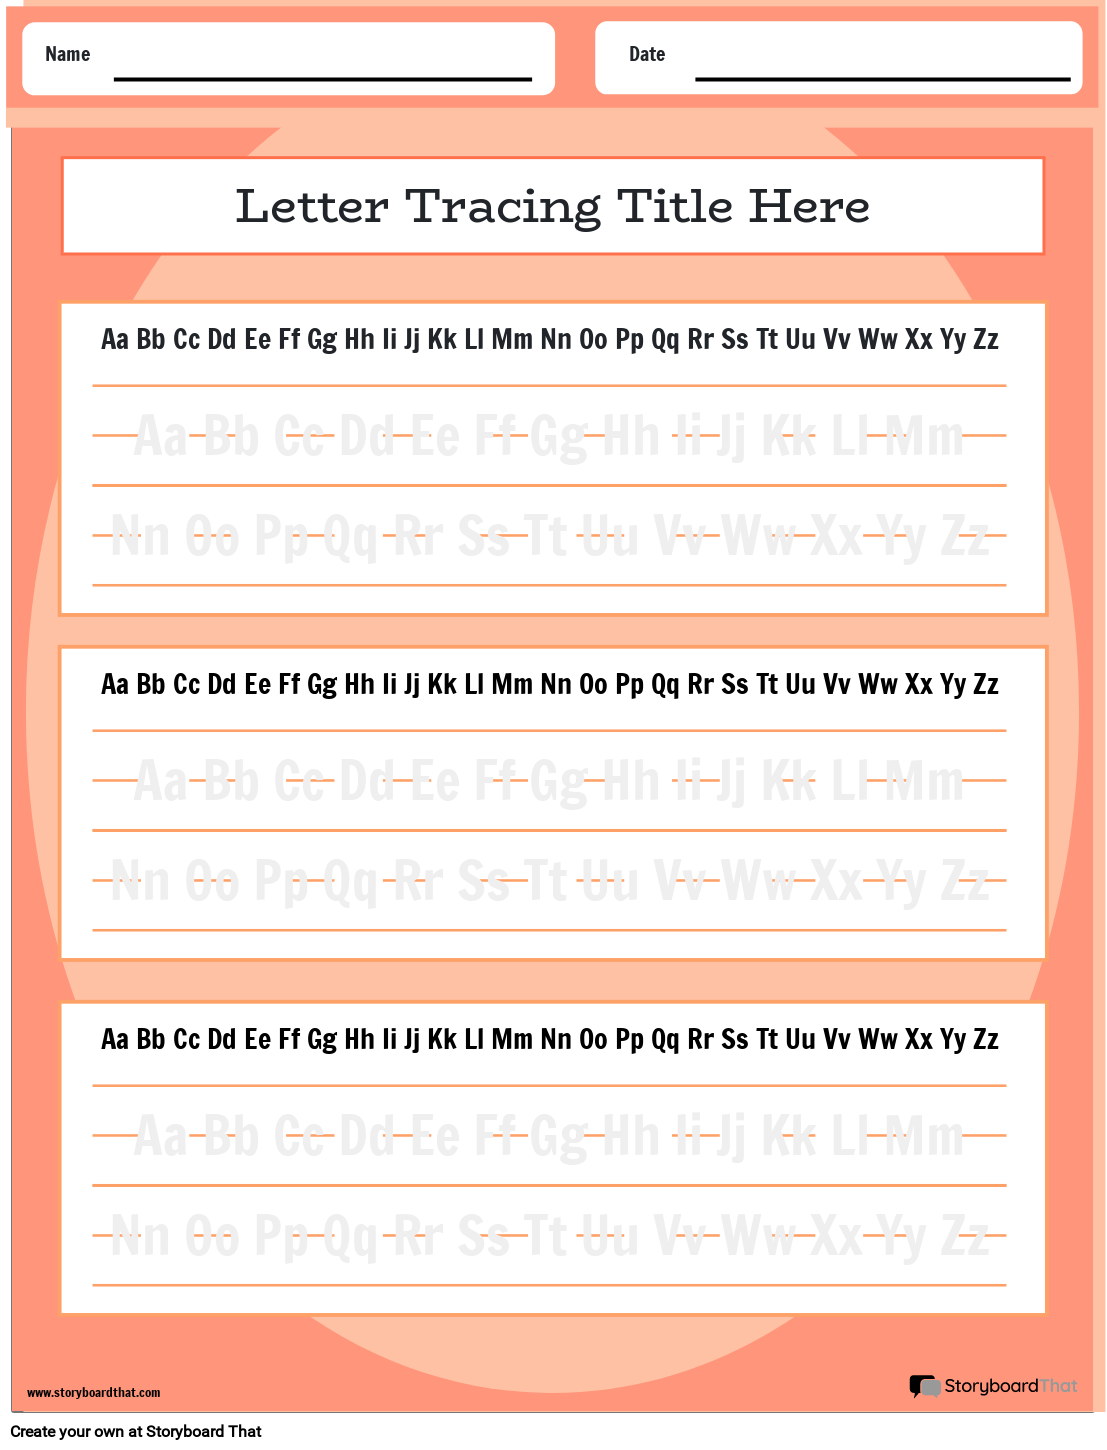 Letter Tracing Worksheet with Bright Orange Background